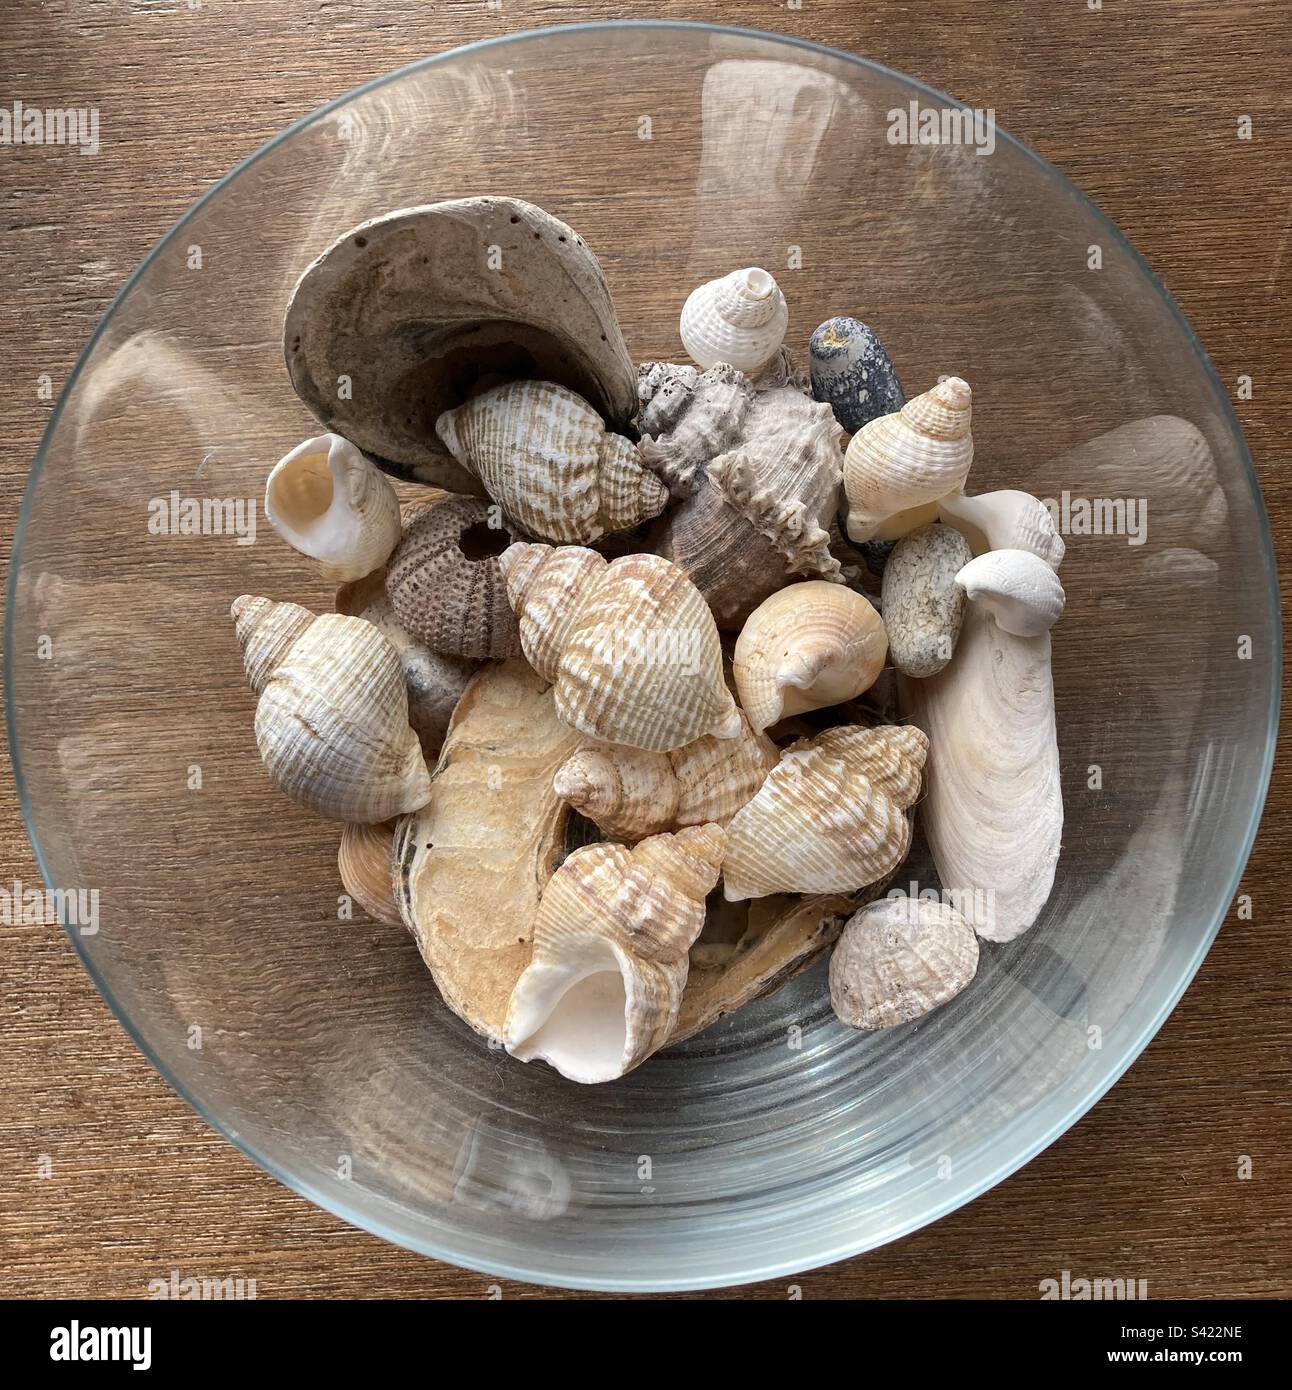 Collection of seashells in a glass bowl Stock Photo